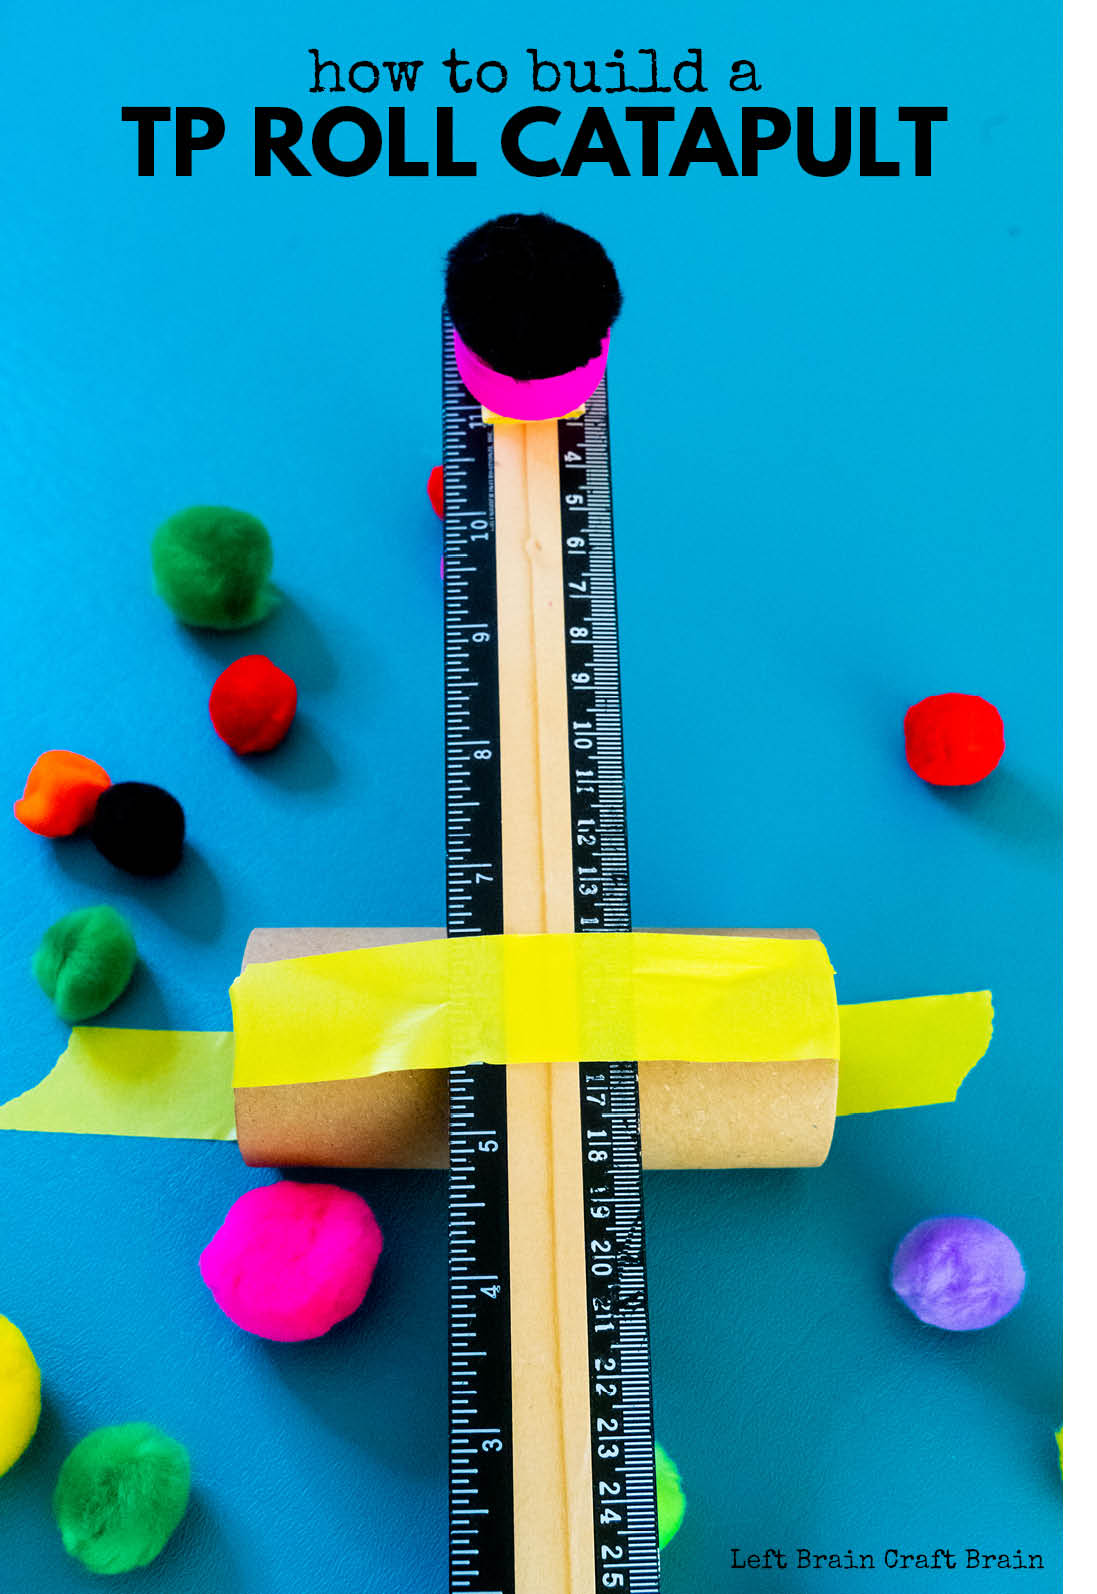 This Toilet Paper Roll Catapult is a fun STEM project for little kids or quick building sessions. Just raid your recycling bin and have fun!